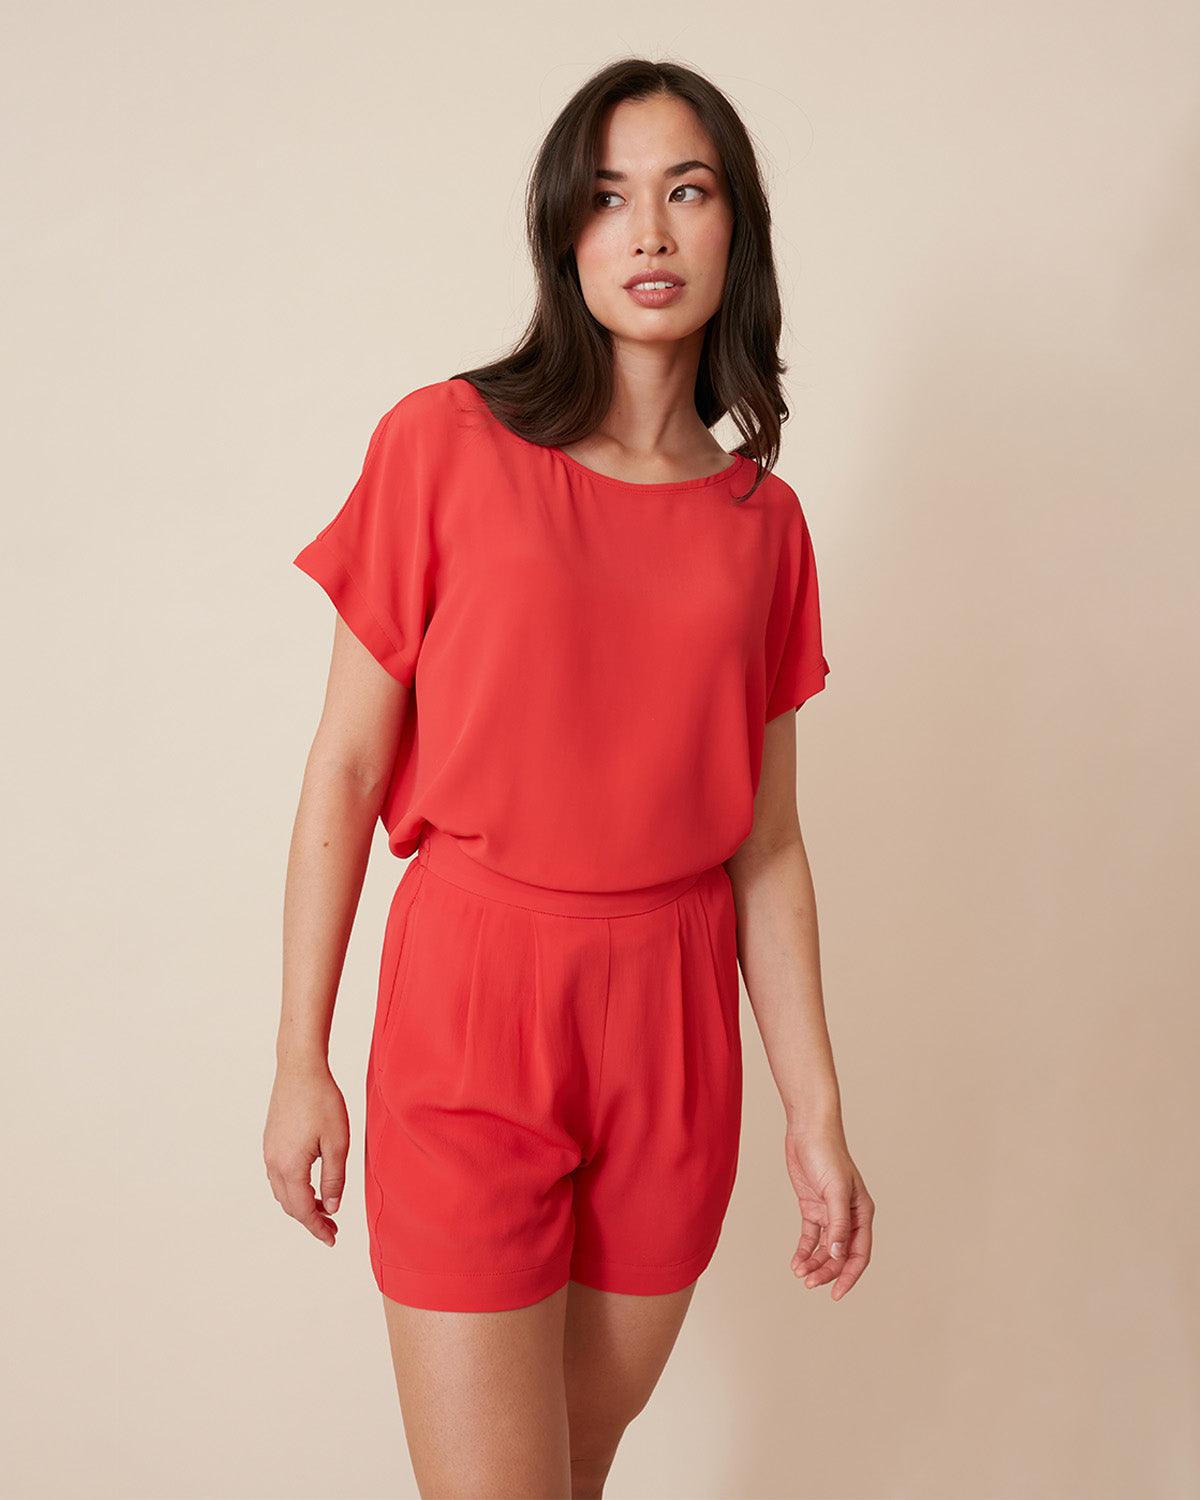 "#color_CHILI RED|Estyr is 5'9", wearing a size XS